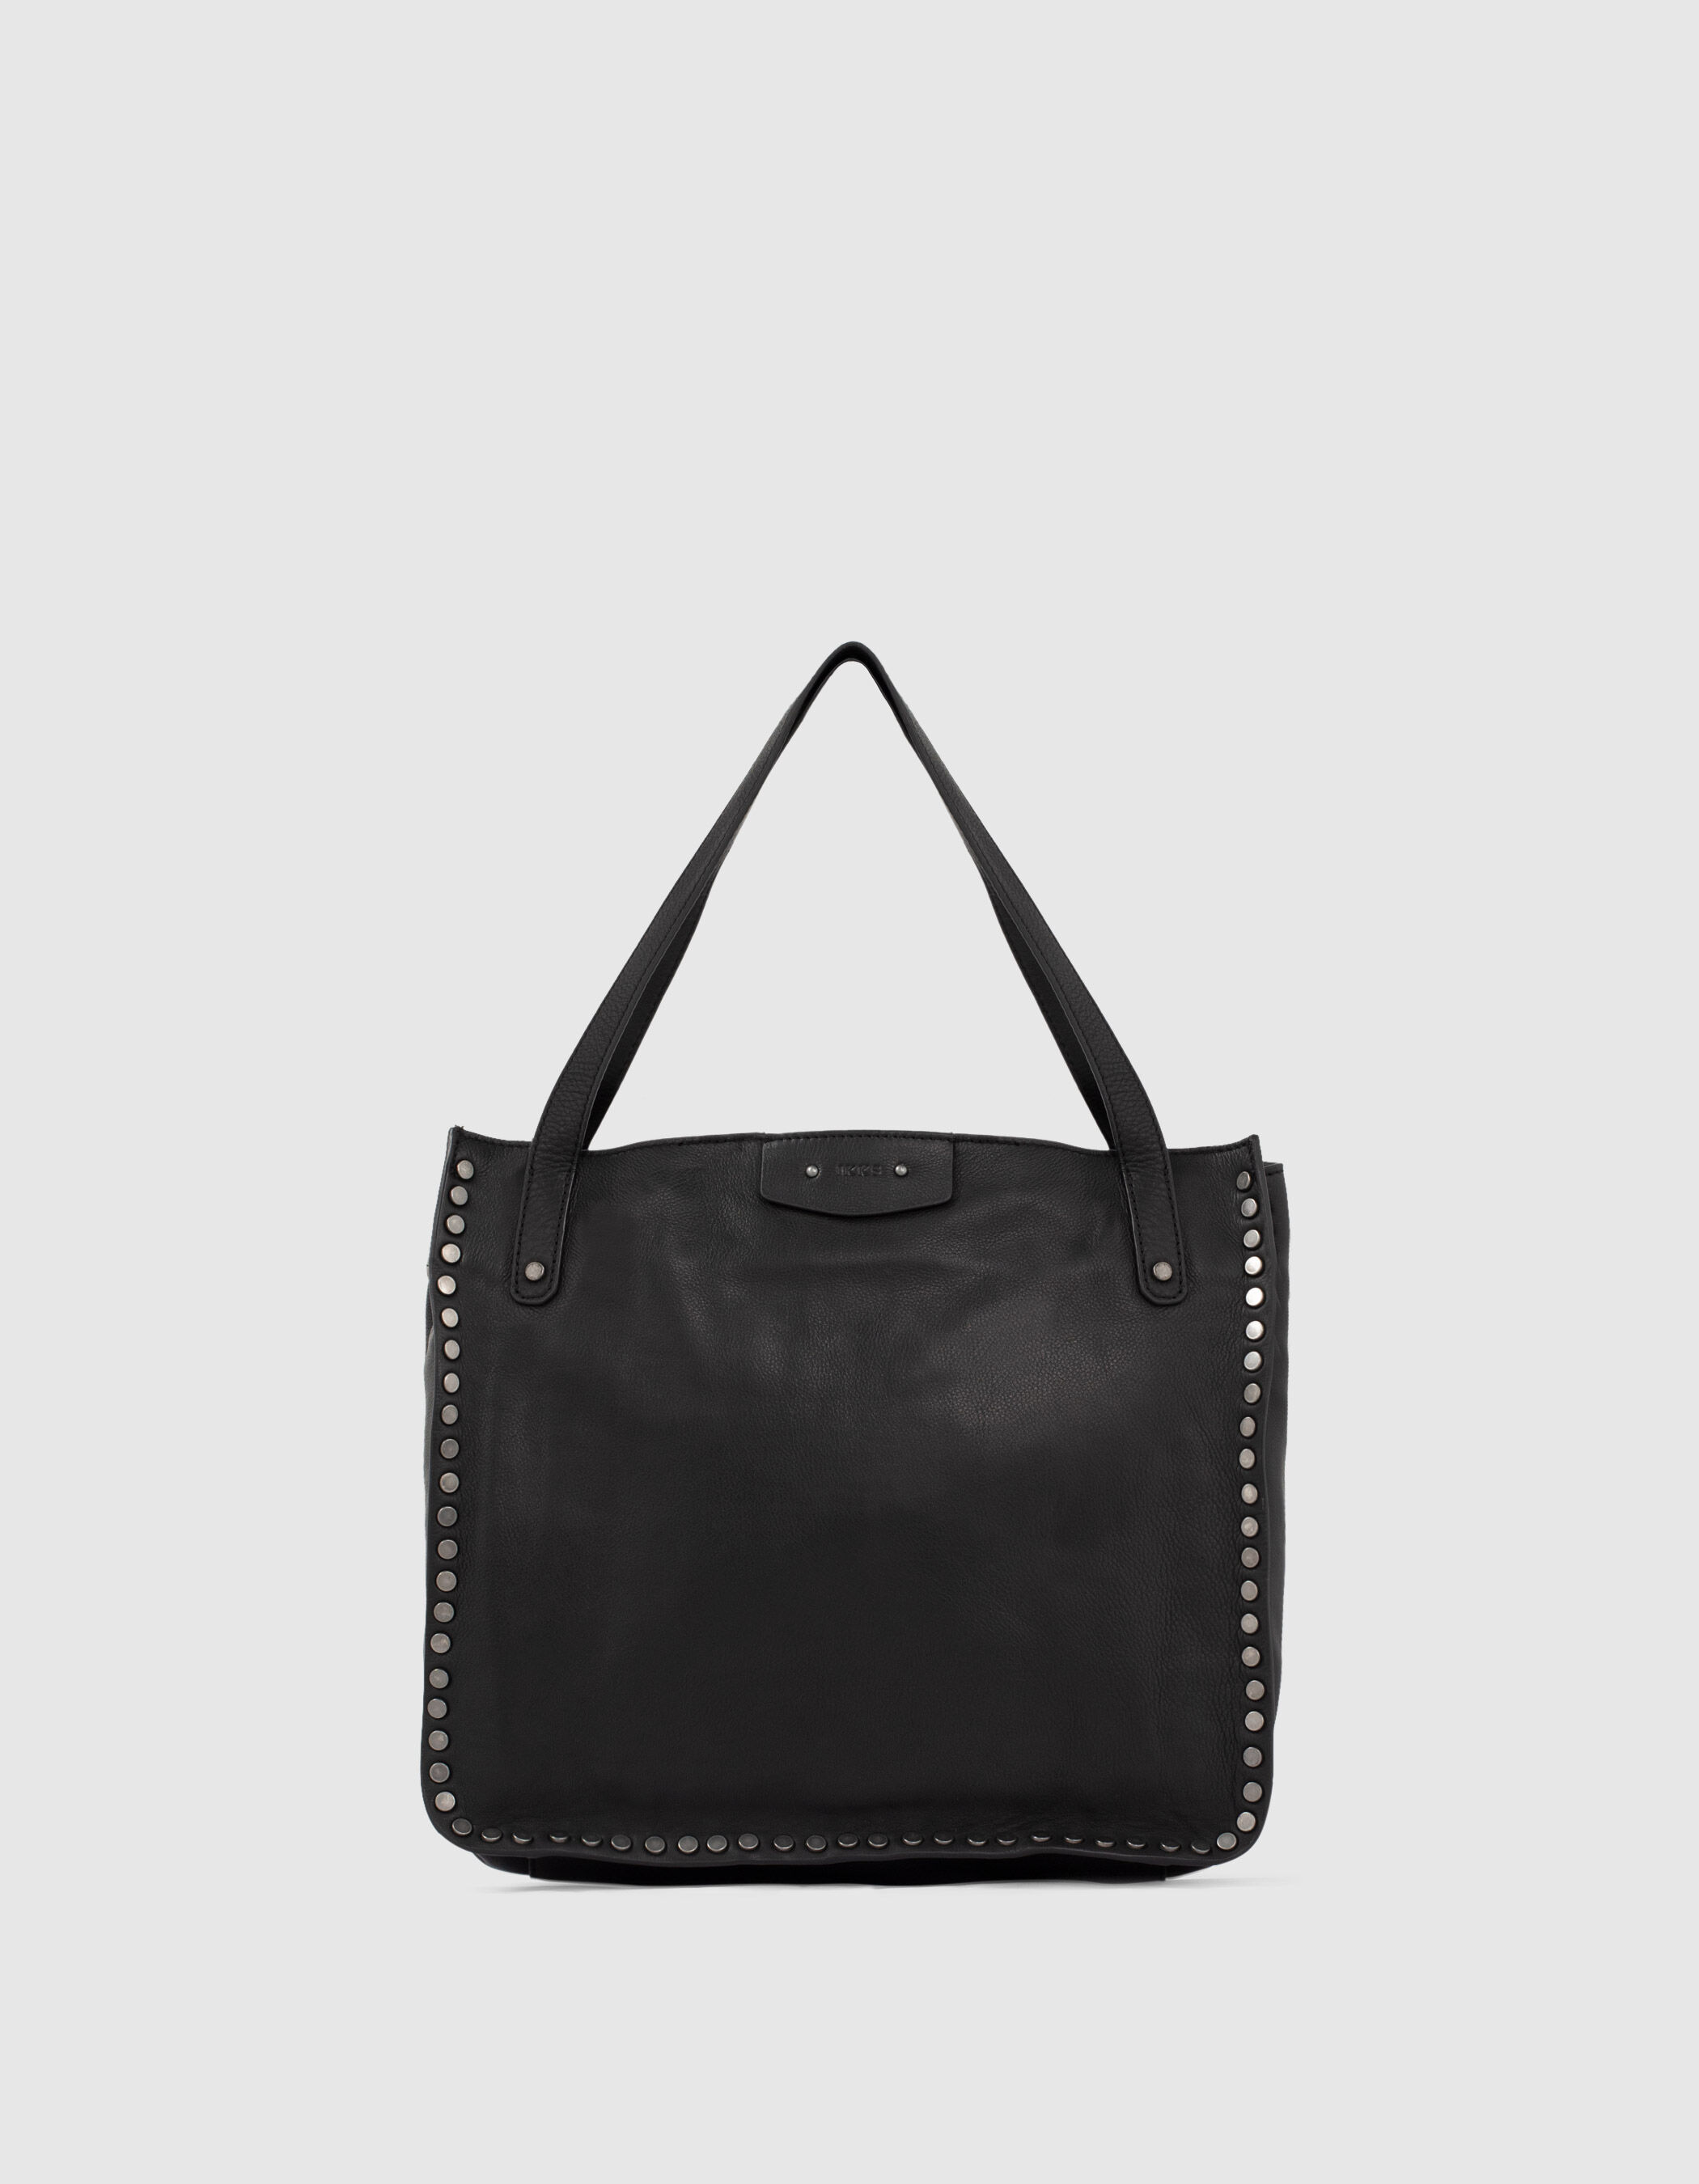 The Working Bag women's black studded leather tote bag